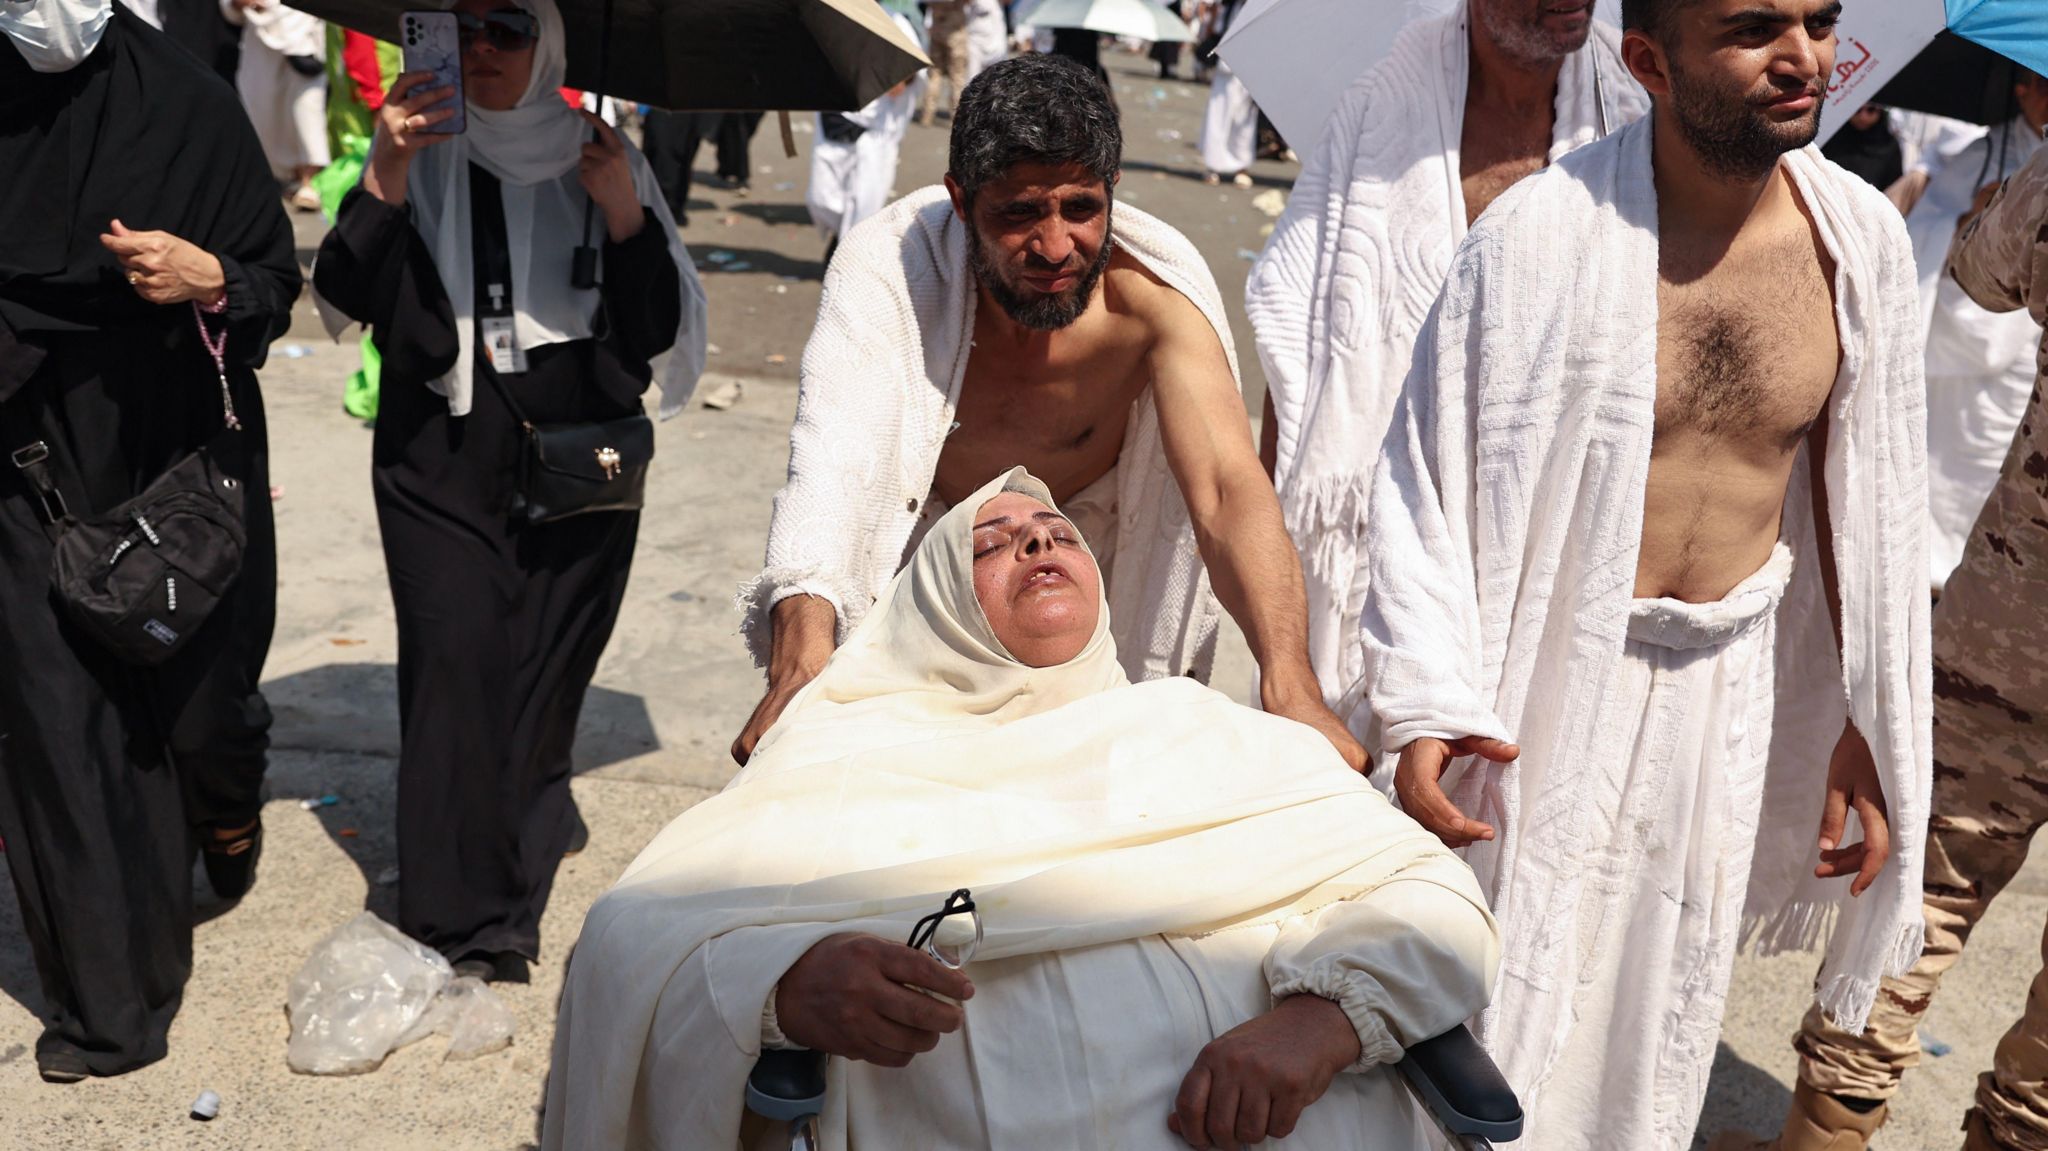 A woman affected by the scorching heat is pushed on a wheelchair as Muslim pilgrims arrive to perform the symbolic 'stoning of the devil' ritual as part of the hajj pilgrimage in Mina, near Saudi Arabia's holy city of Mecca, on June 16, 202